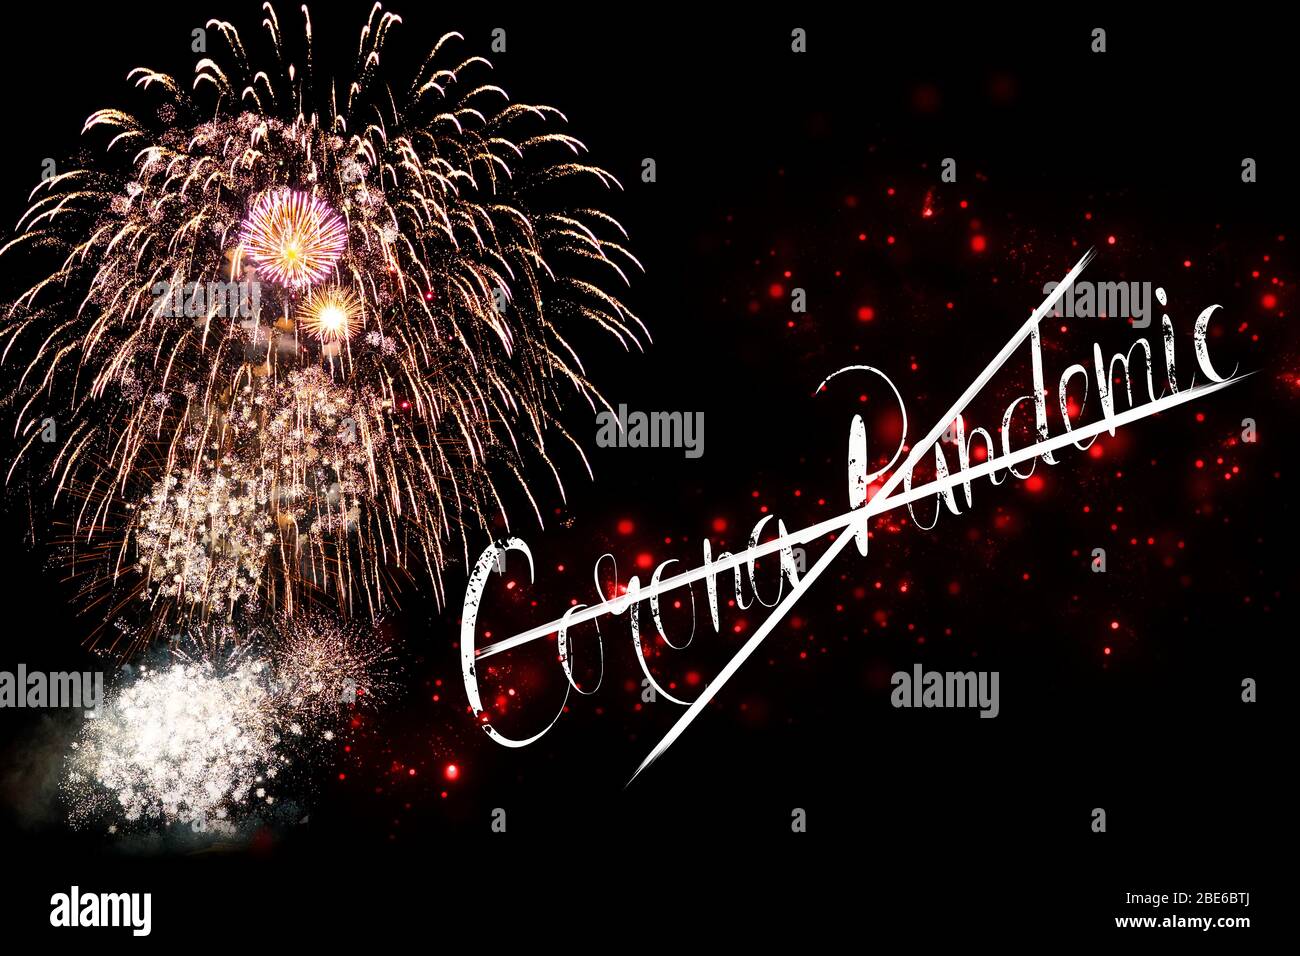 The end of the Corona Pandemic with fireworks on black background Stock Photo